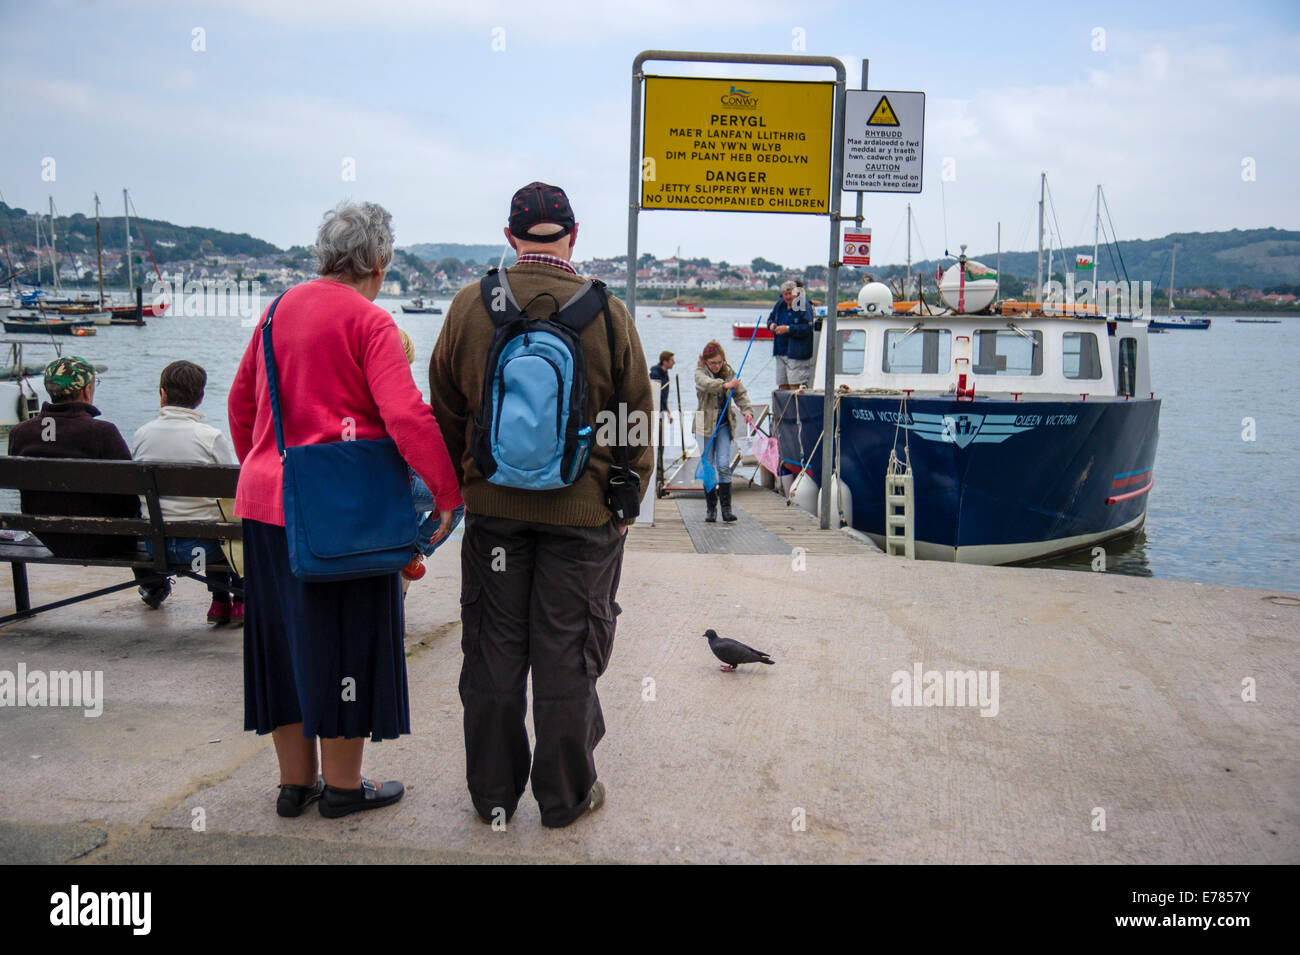 Ppeople waiting for a boat trip in Conwy, North Wales. Stock Photo